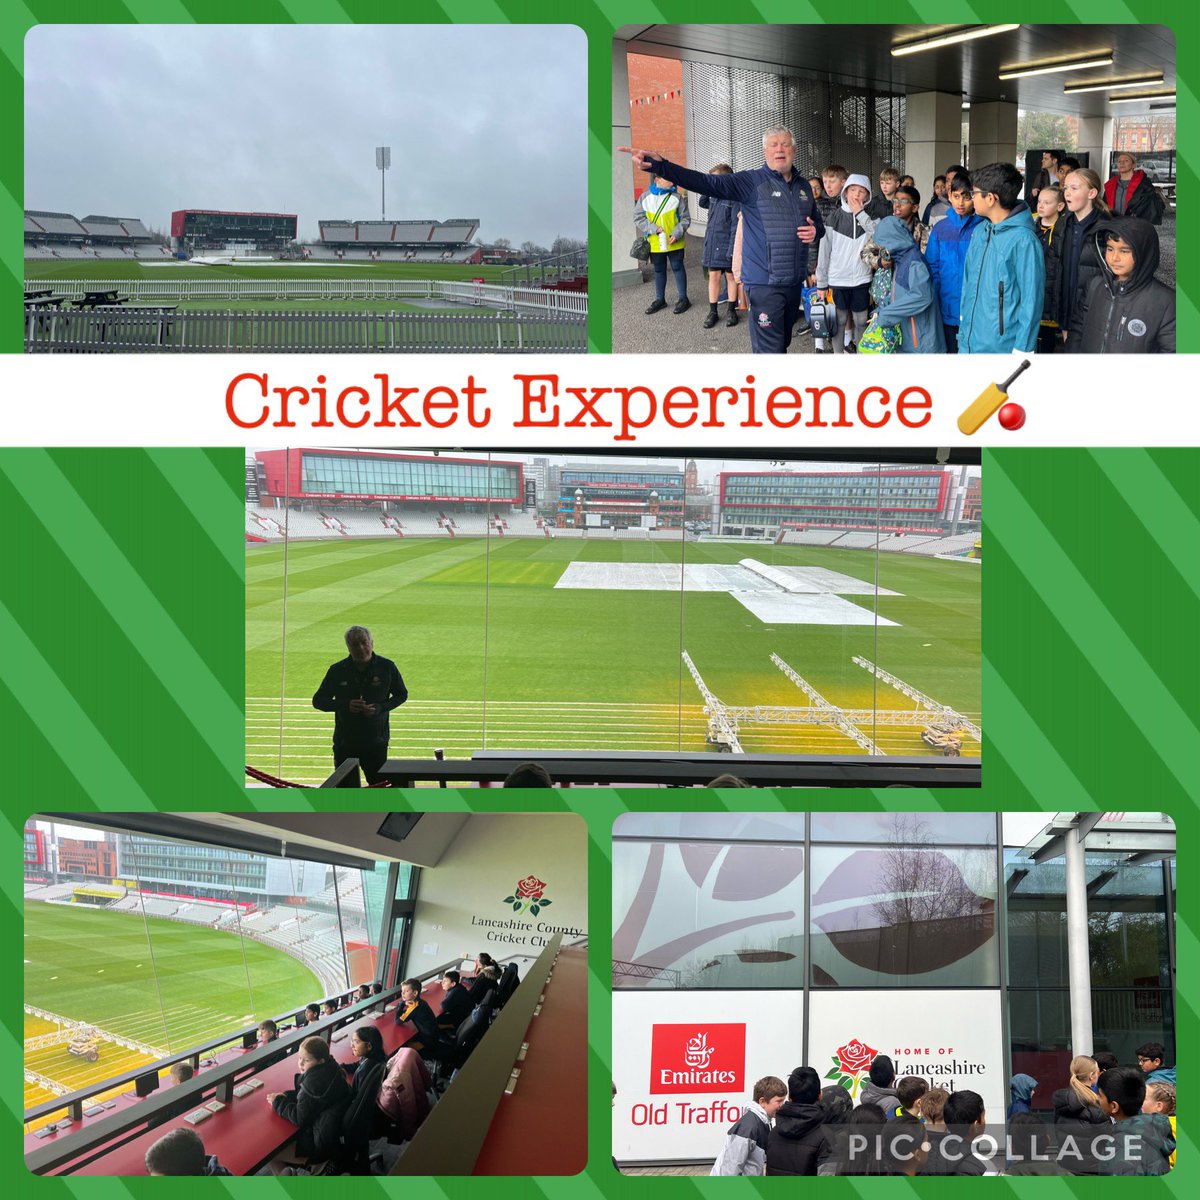 An exciting day ahead @lancscricket @EmiratesOT for our Y5 and Y6 Cricketers! #play #cricket #inspire #schooltrip